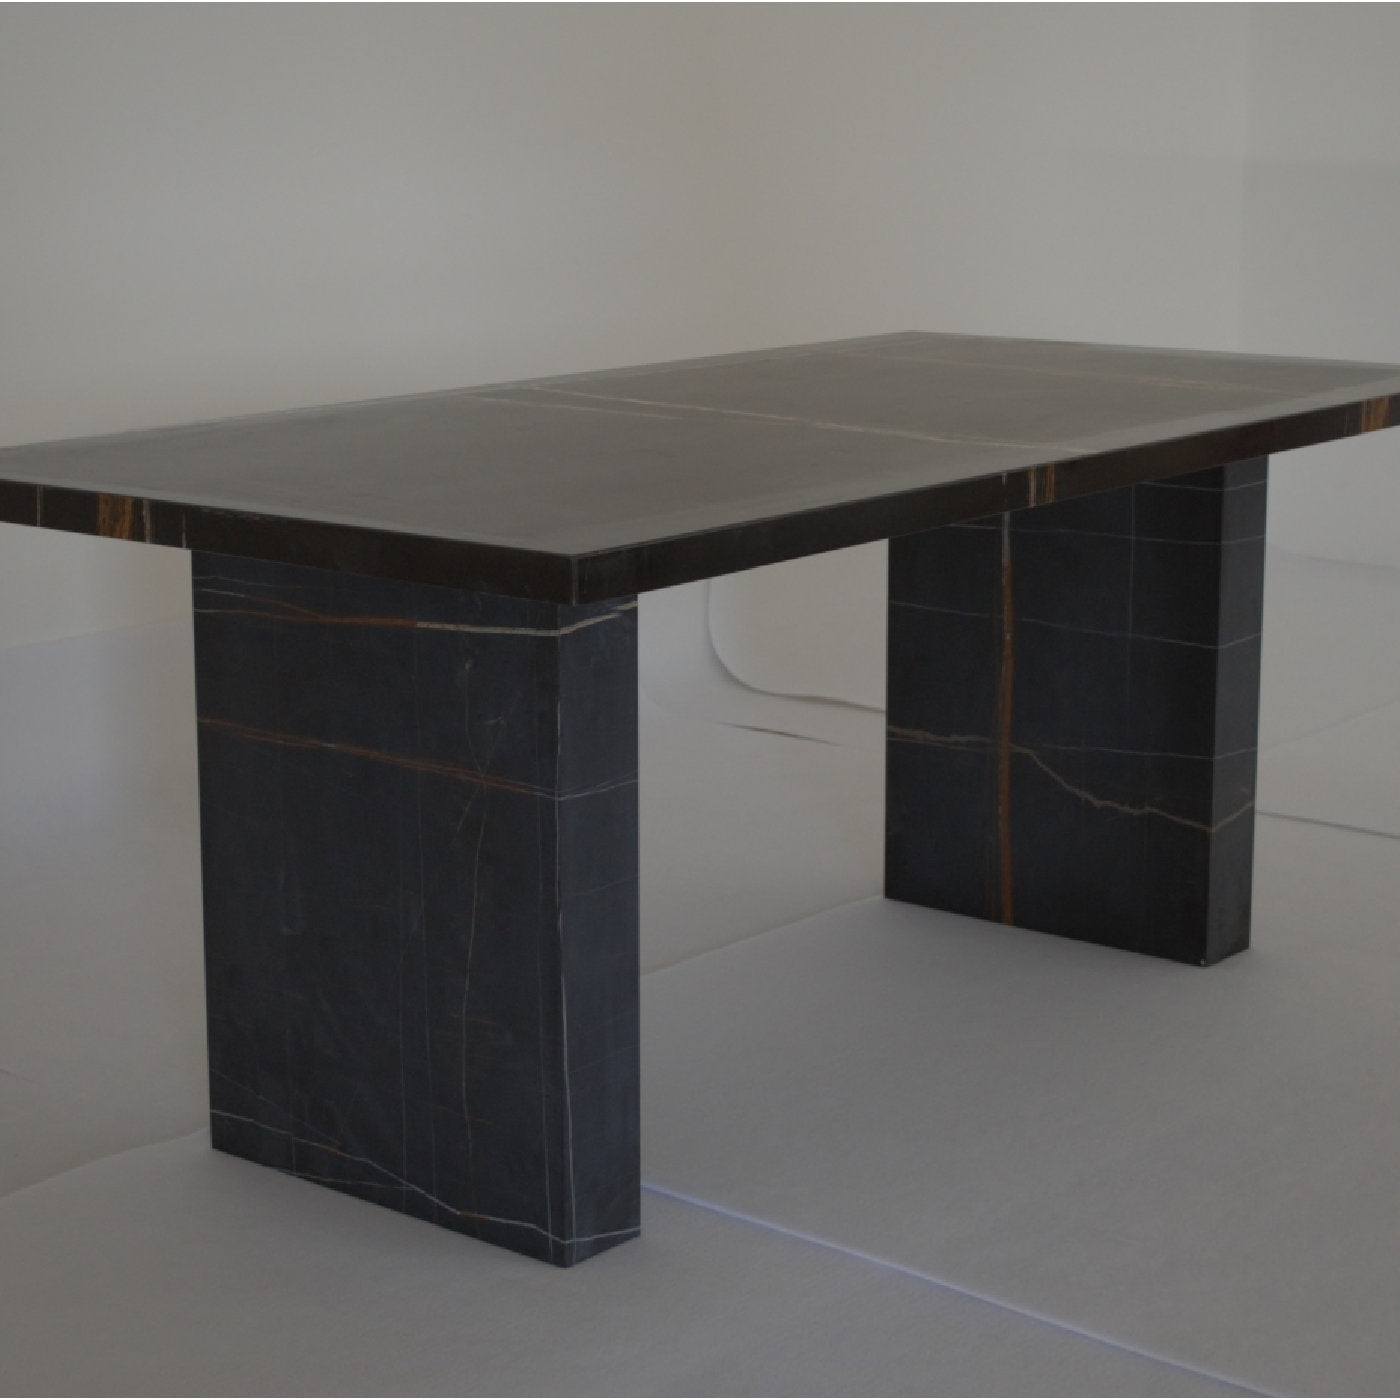 Big Strong Table in Nero Gold - Alternative view 1